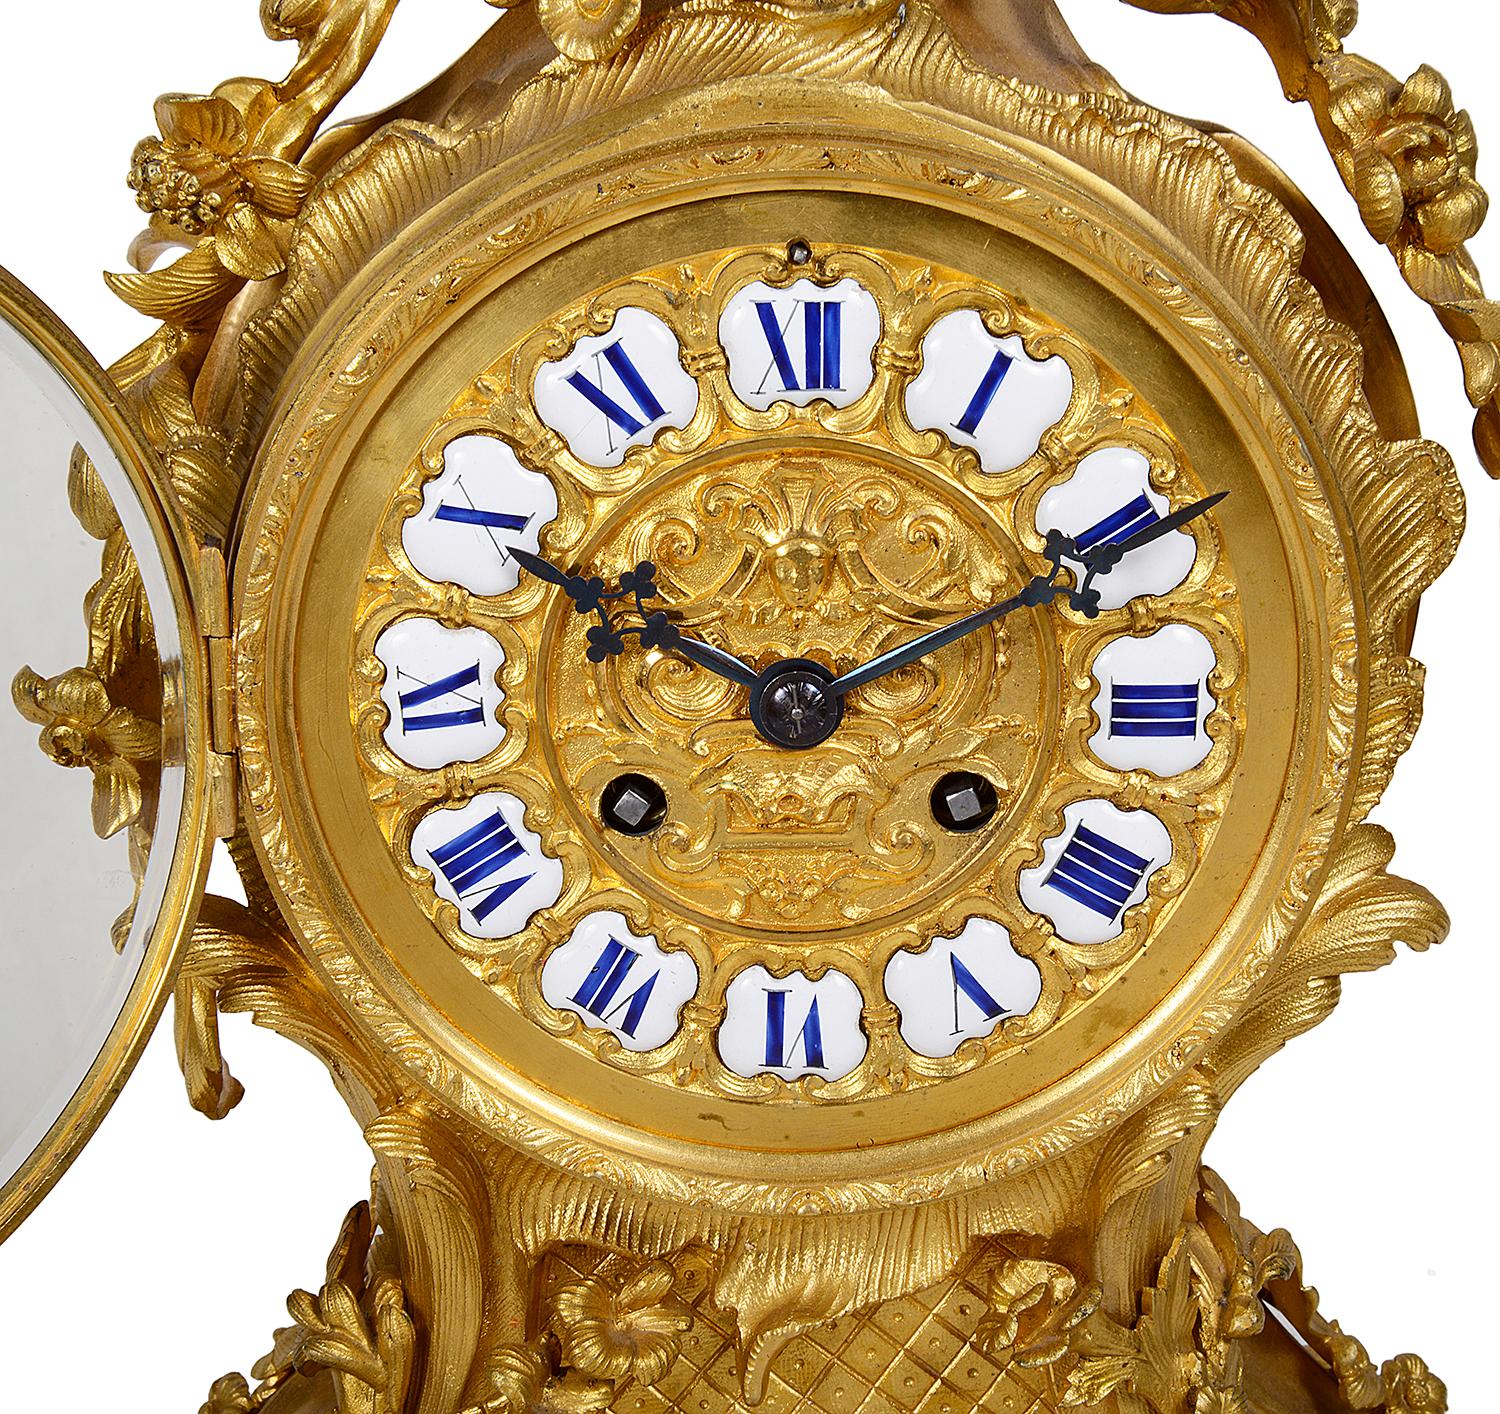 A very good quality 19th century French gilded ormolu Louis XVI style mantel clock, having wonderful scrolling foliate decoration in the Rococo style, garlands of flowers draped either side of the clock. White and blue enamel Roman numeral to the